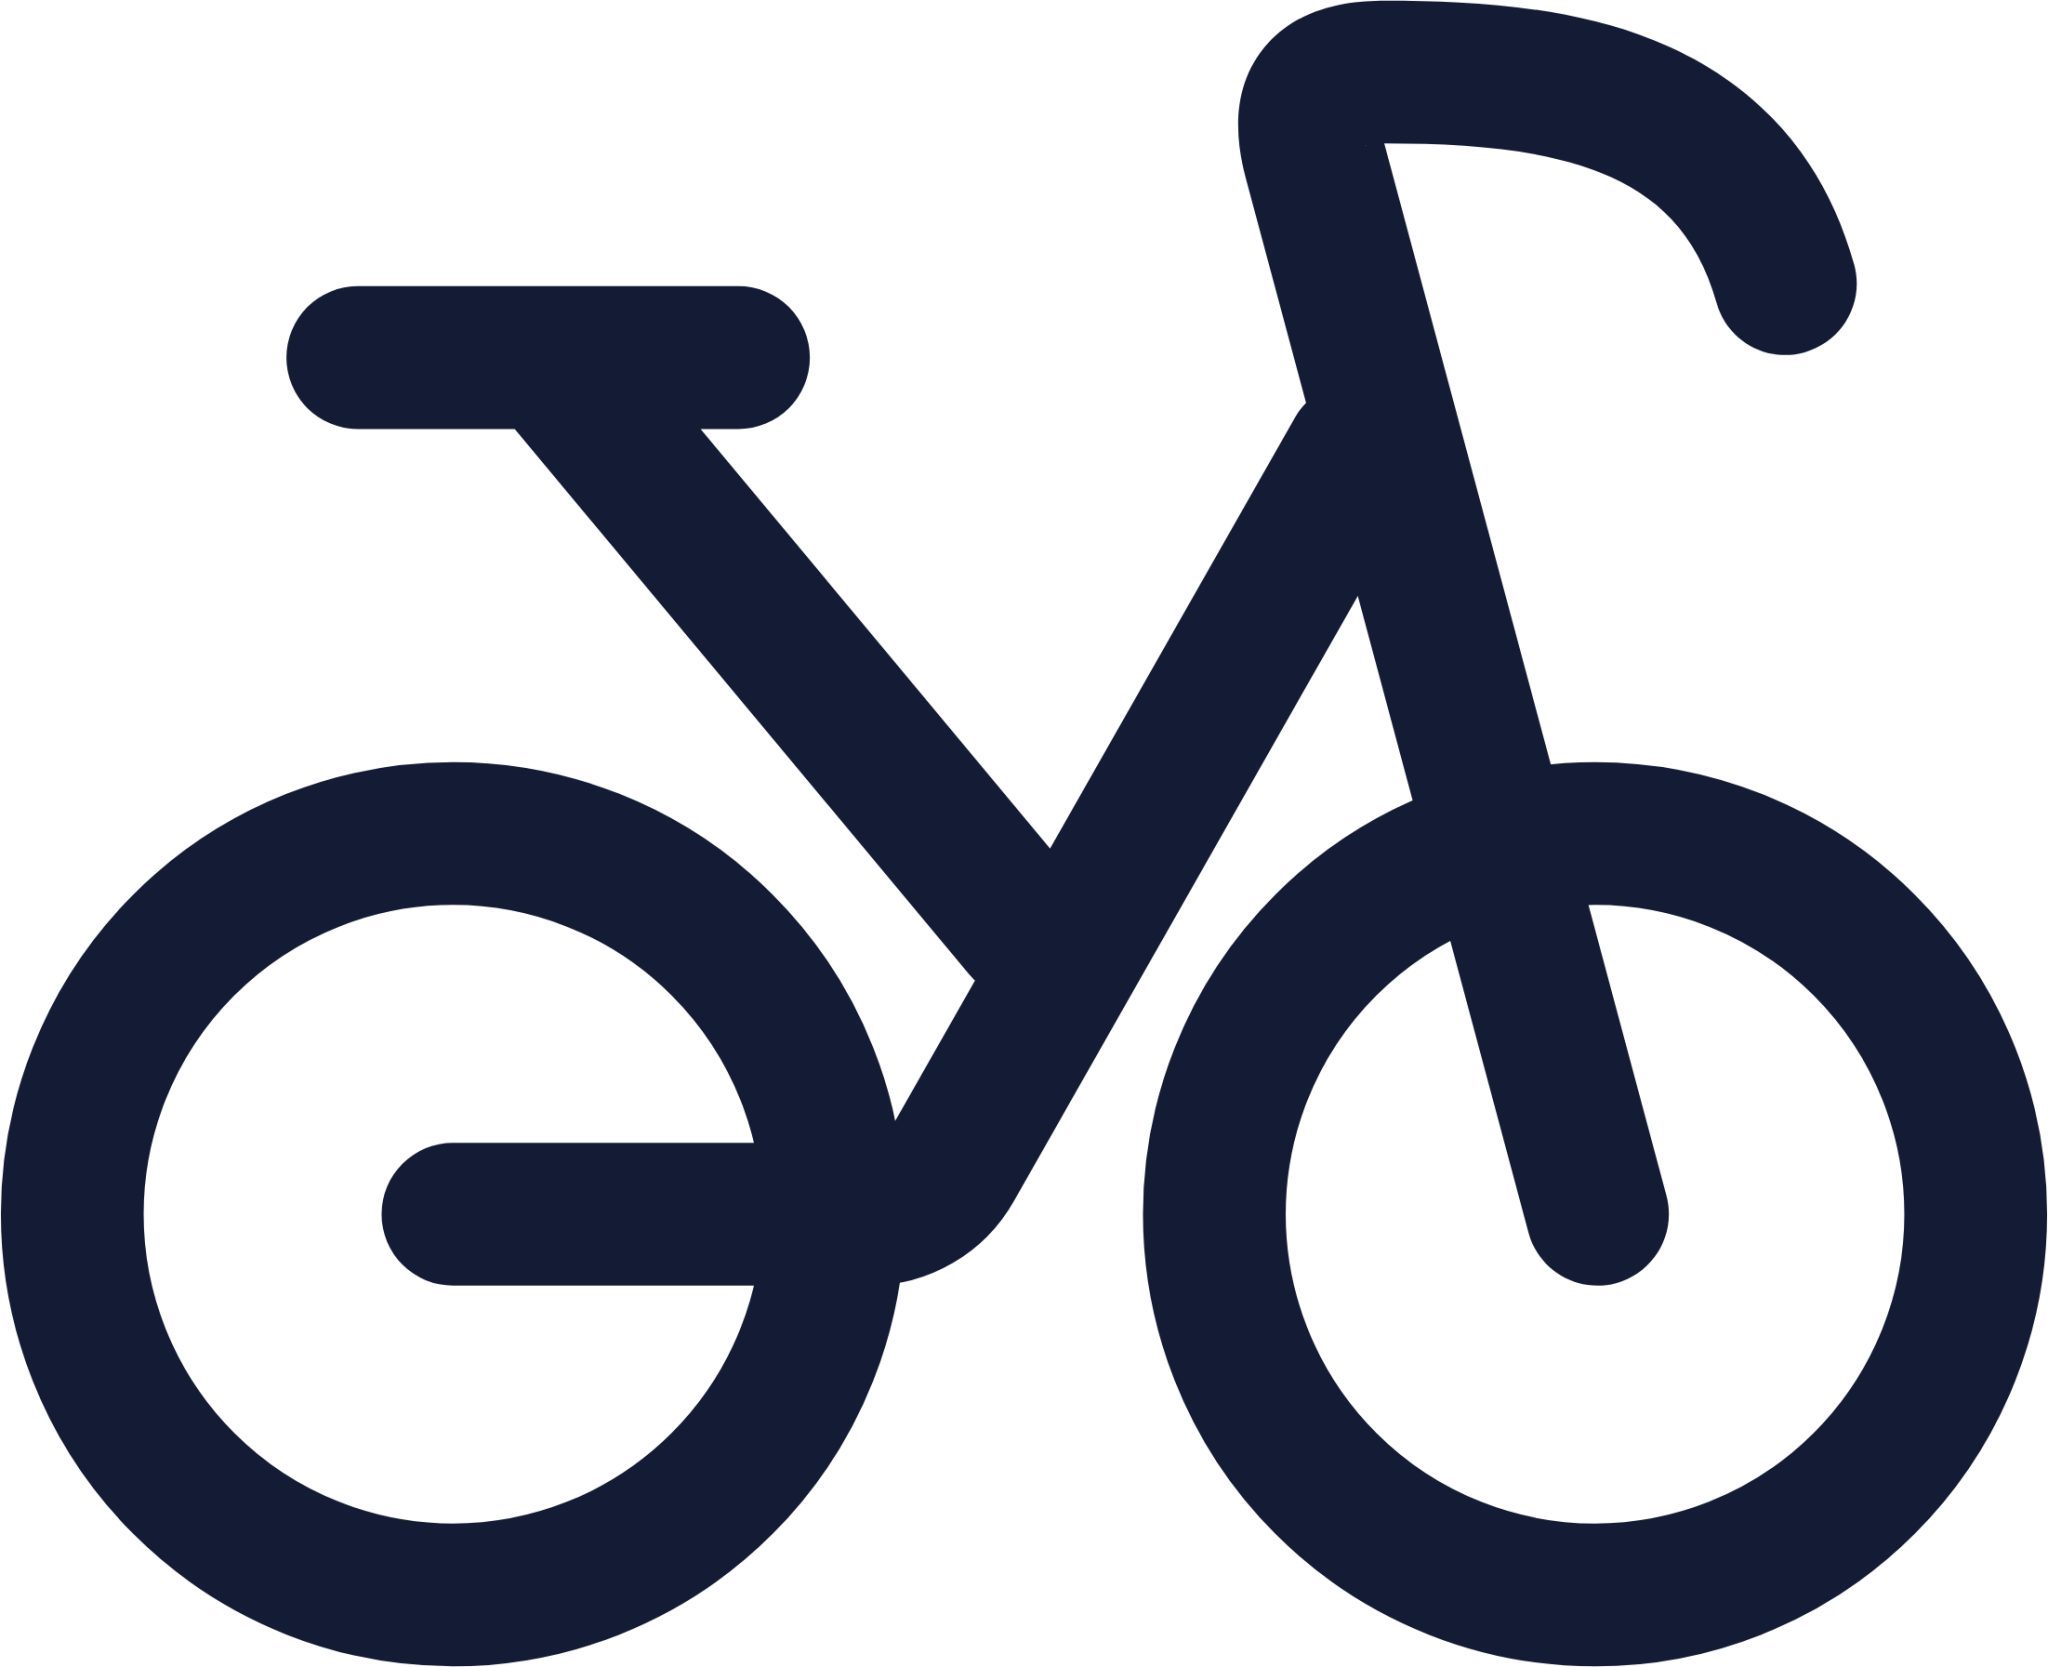 bicycle icon